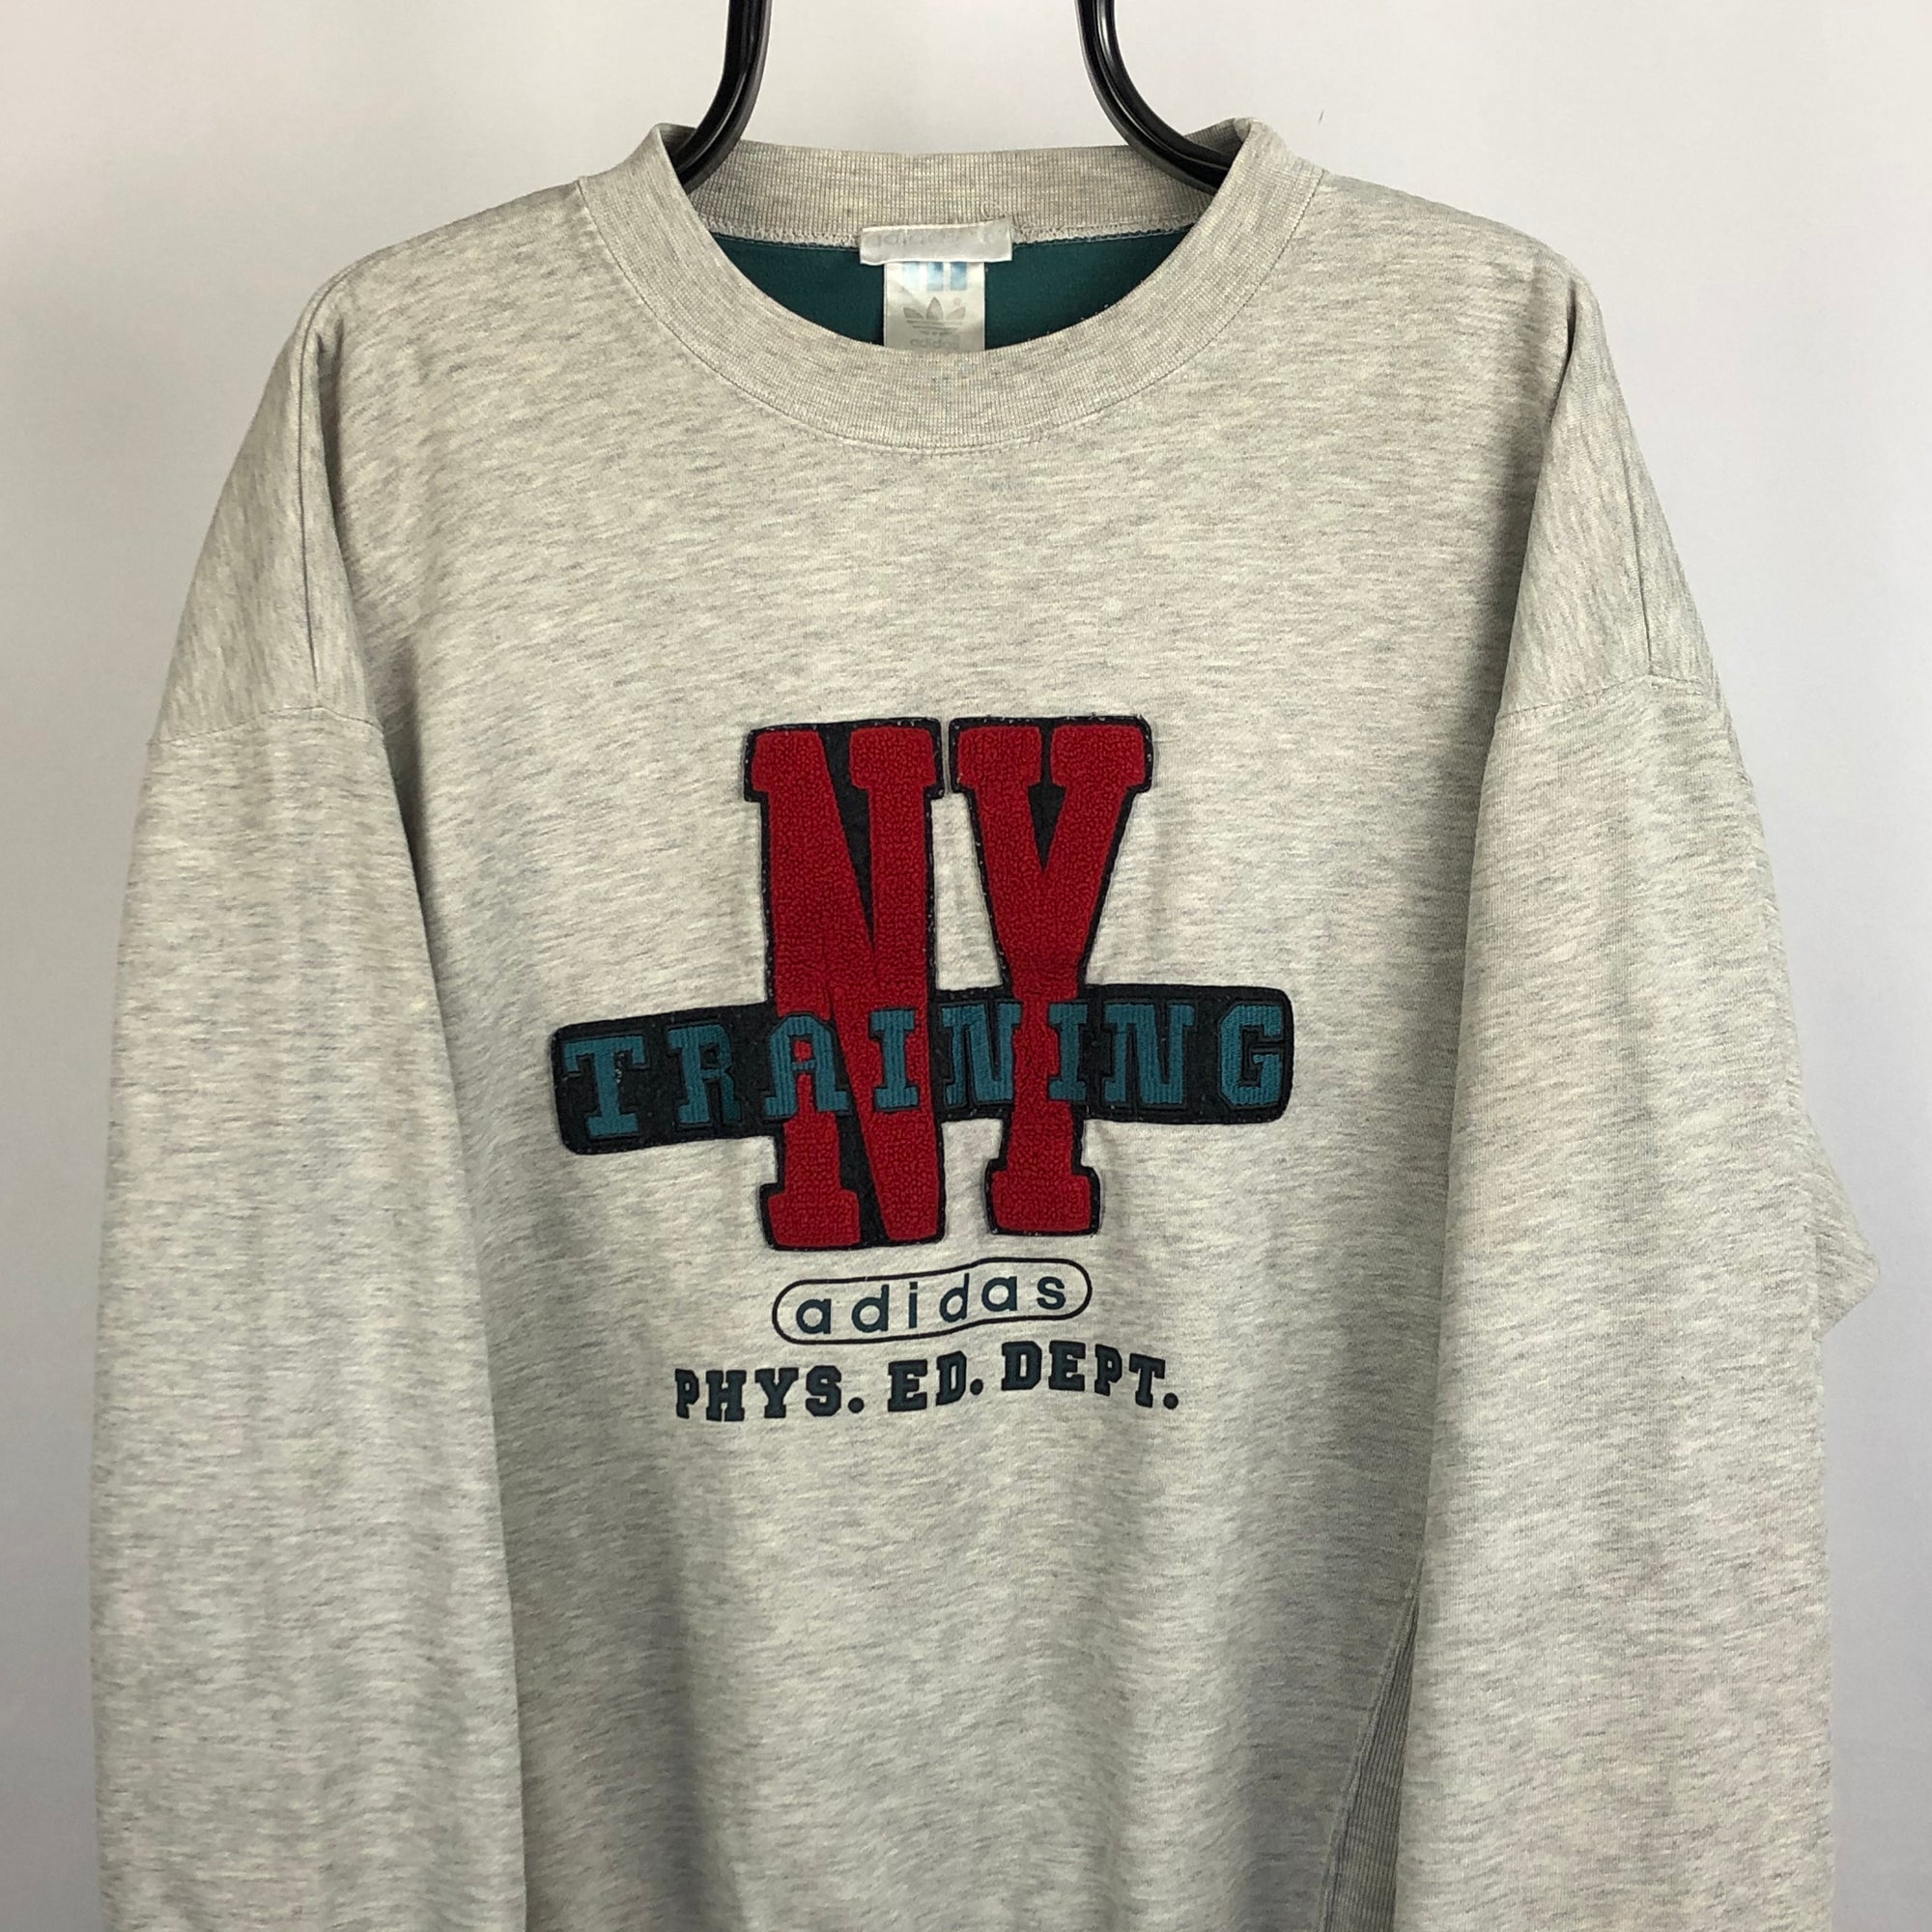 Vintage Adidas 'NY Training' Embroidered Sweatshirt in Grey - Men's Large/Women's XL